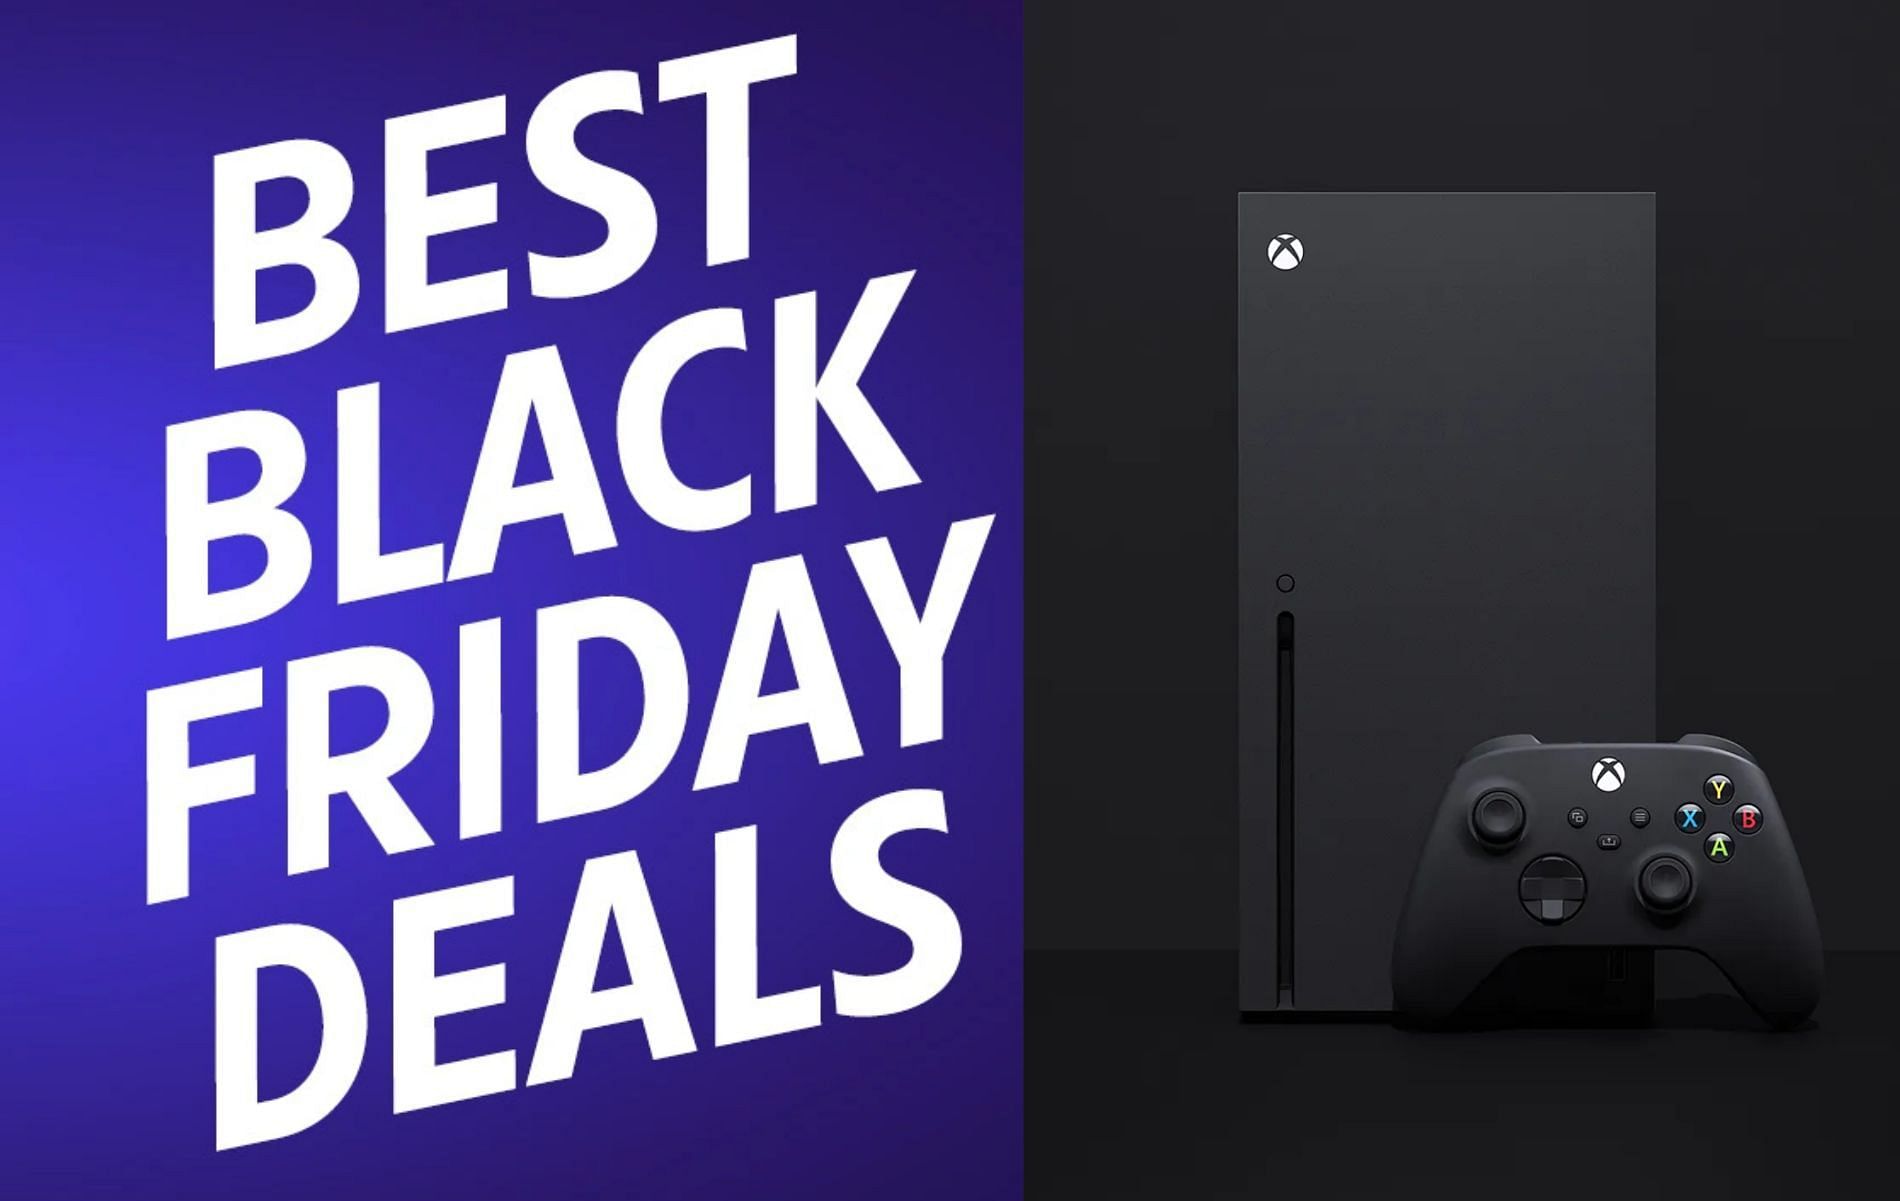 Xbox accessories to get this Black Friday Sale (Image by Microsoft)